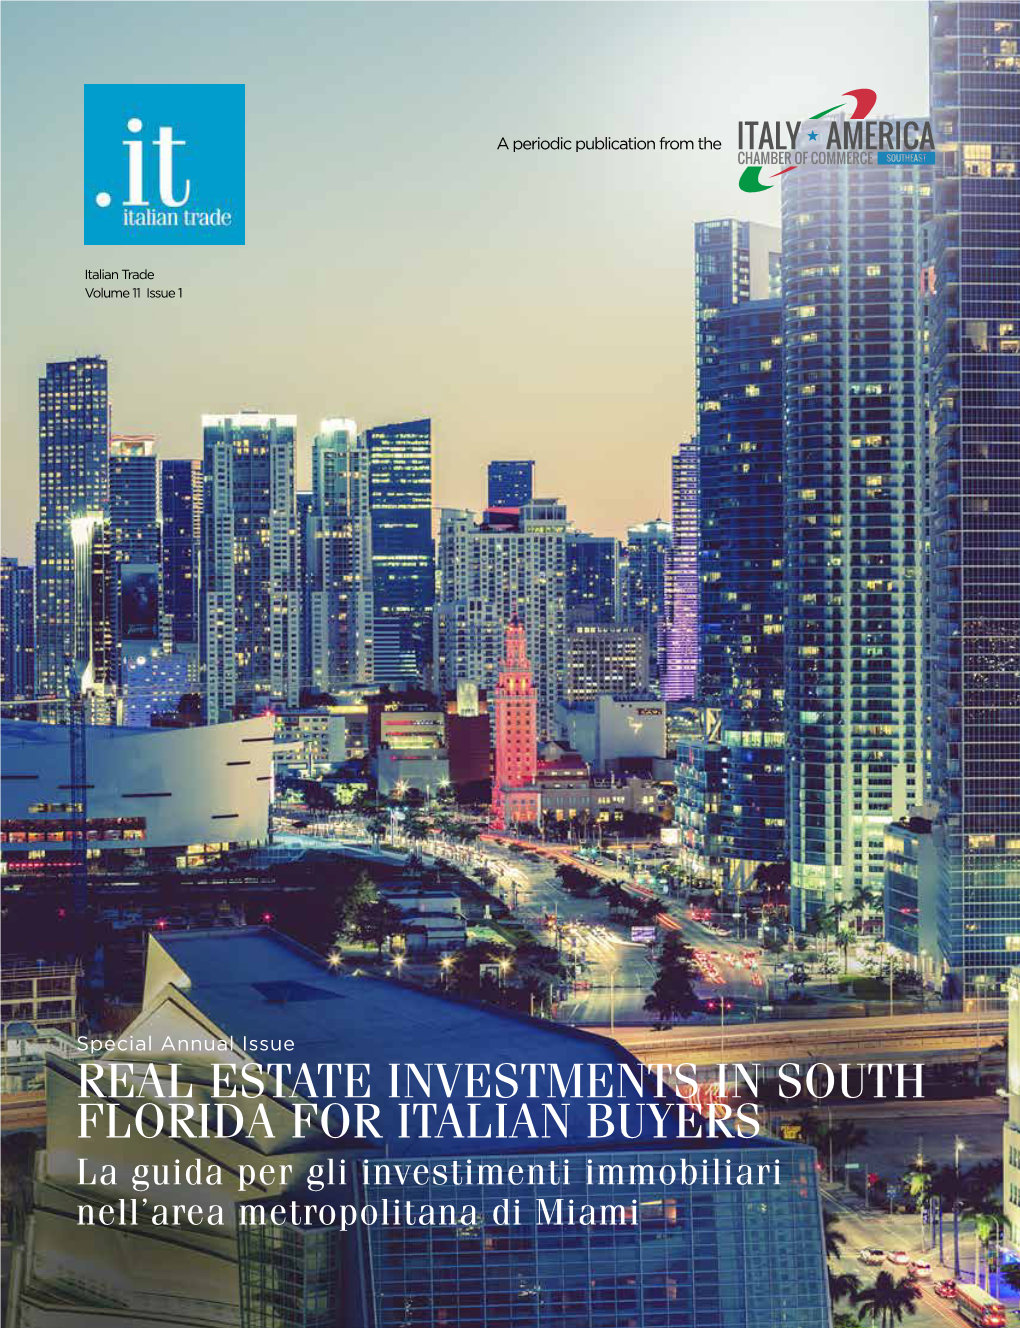 Real Estate Investments in South Florida for Italian